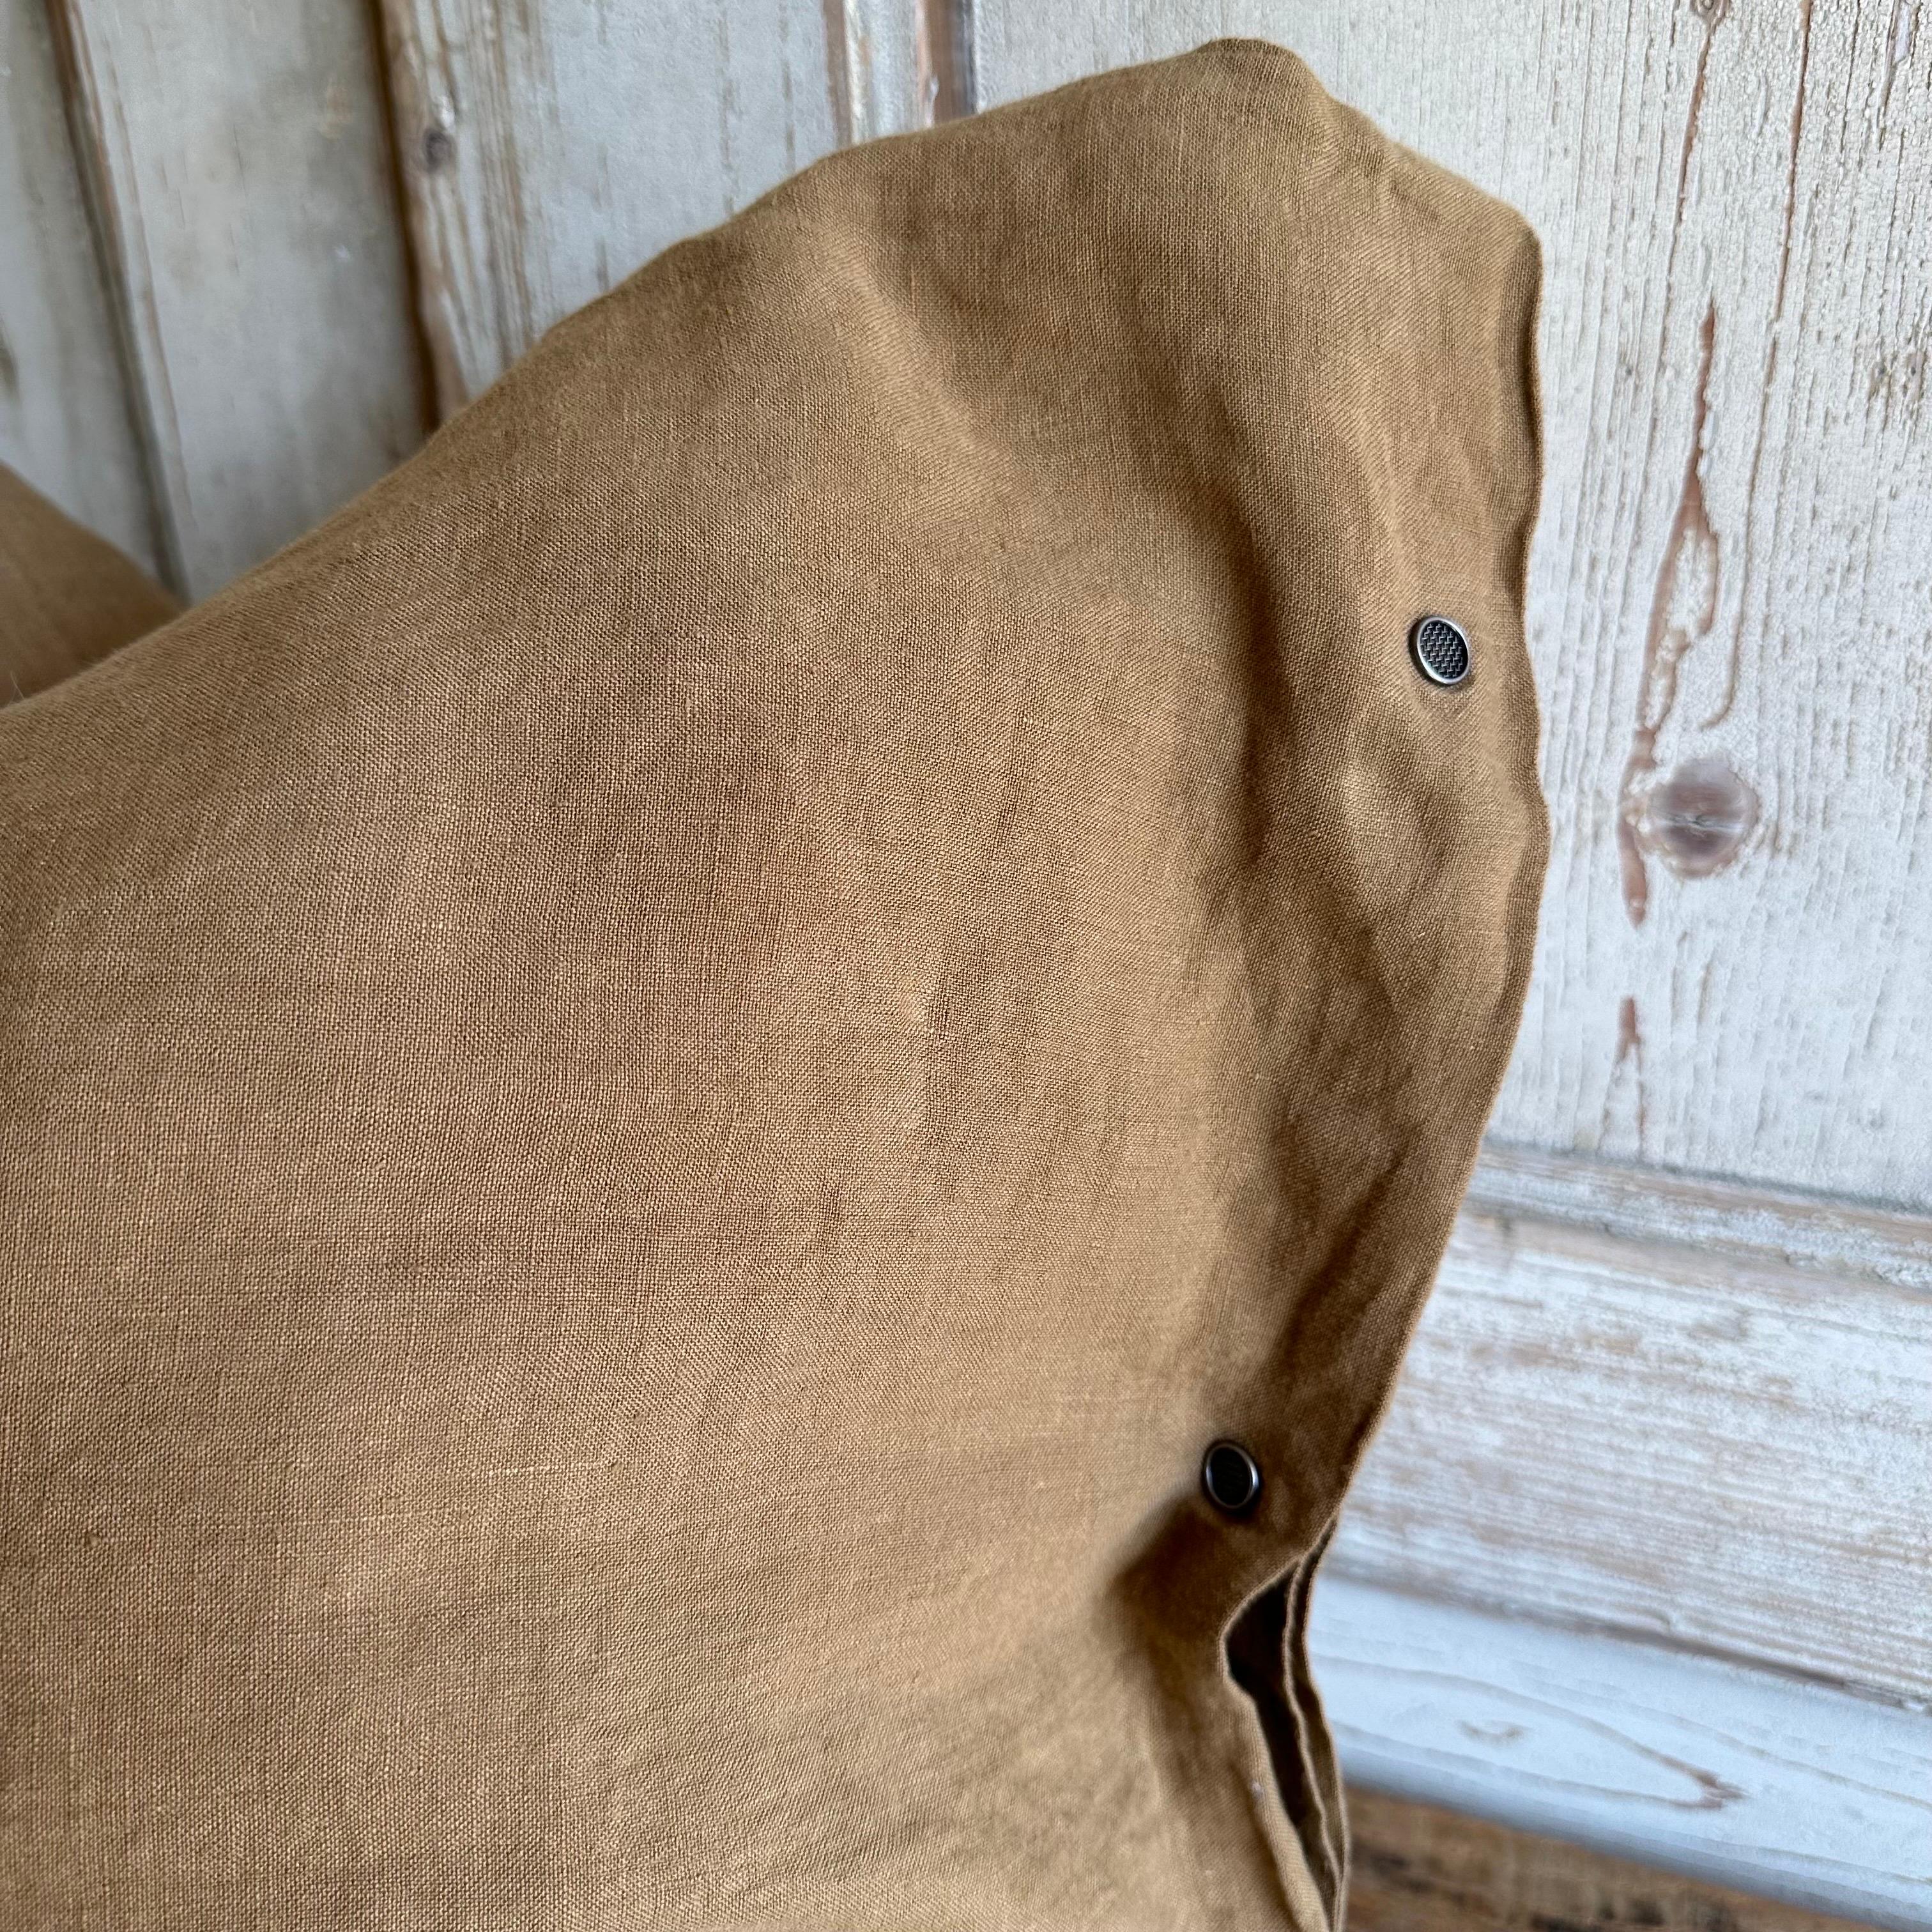 Beautiful stone washed taie d'oreiller linen pillow cover.
Color: Caramel
Size 25